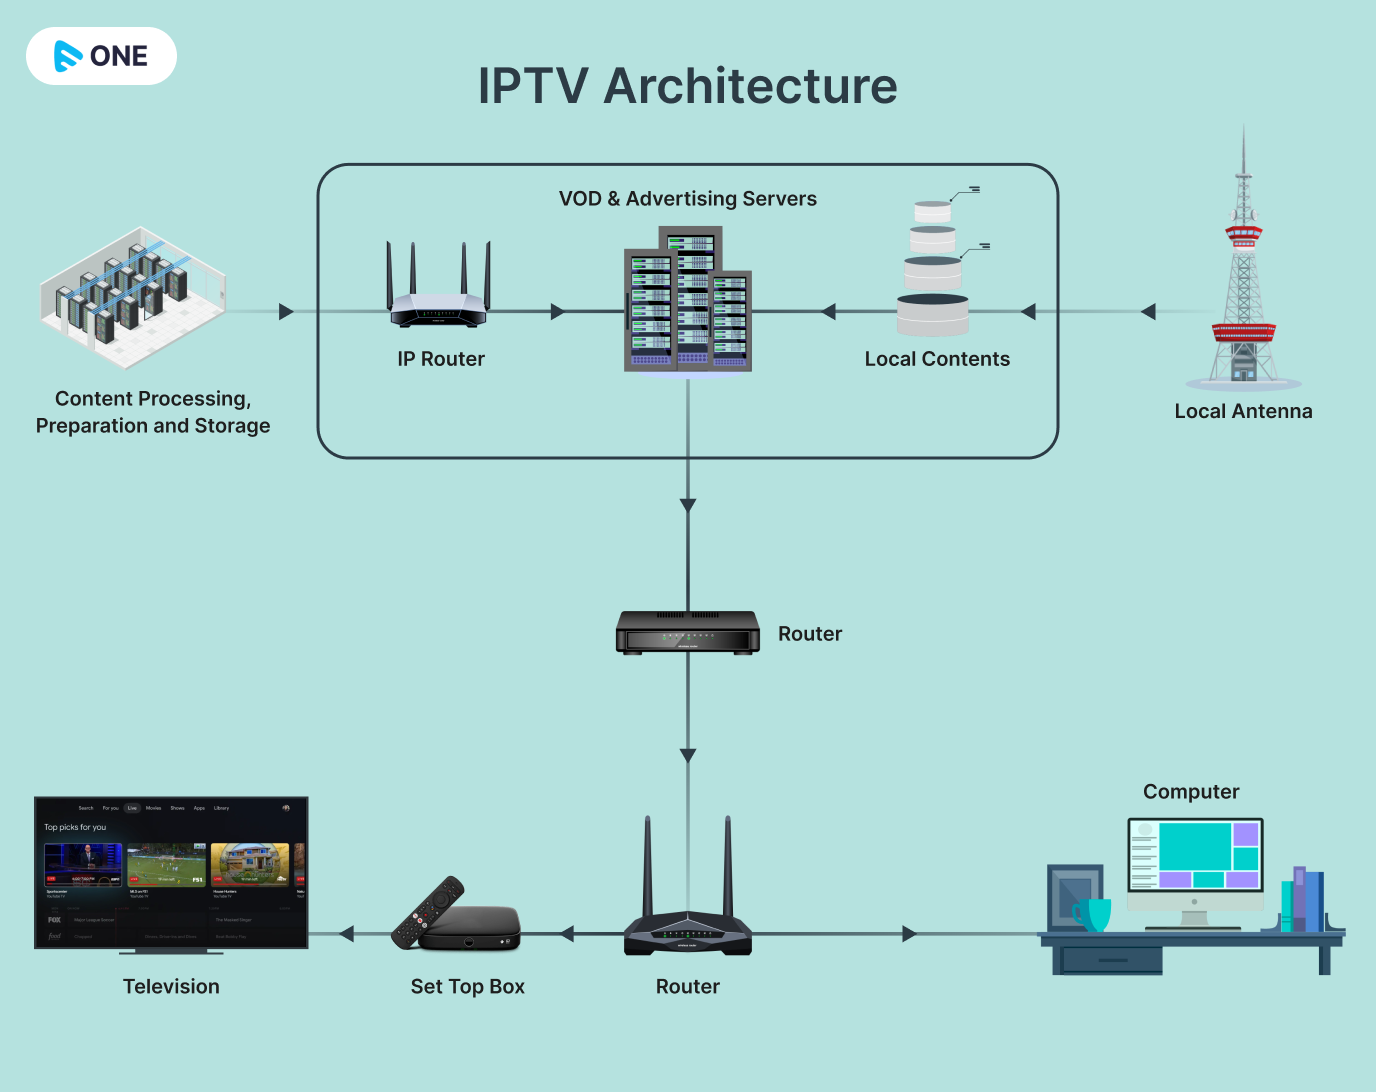 Learn To Differentiate: IPTV Business Opportunities